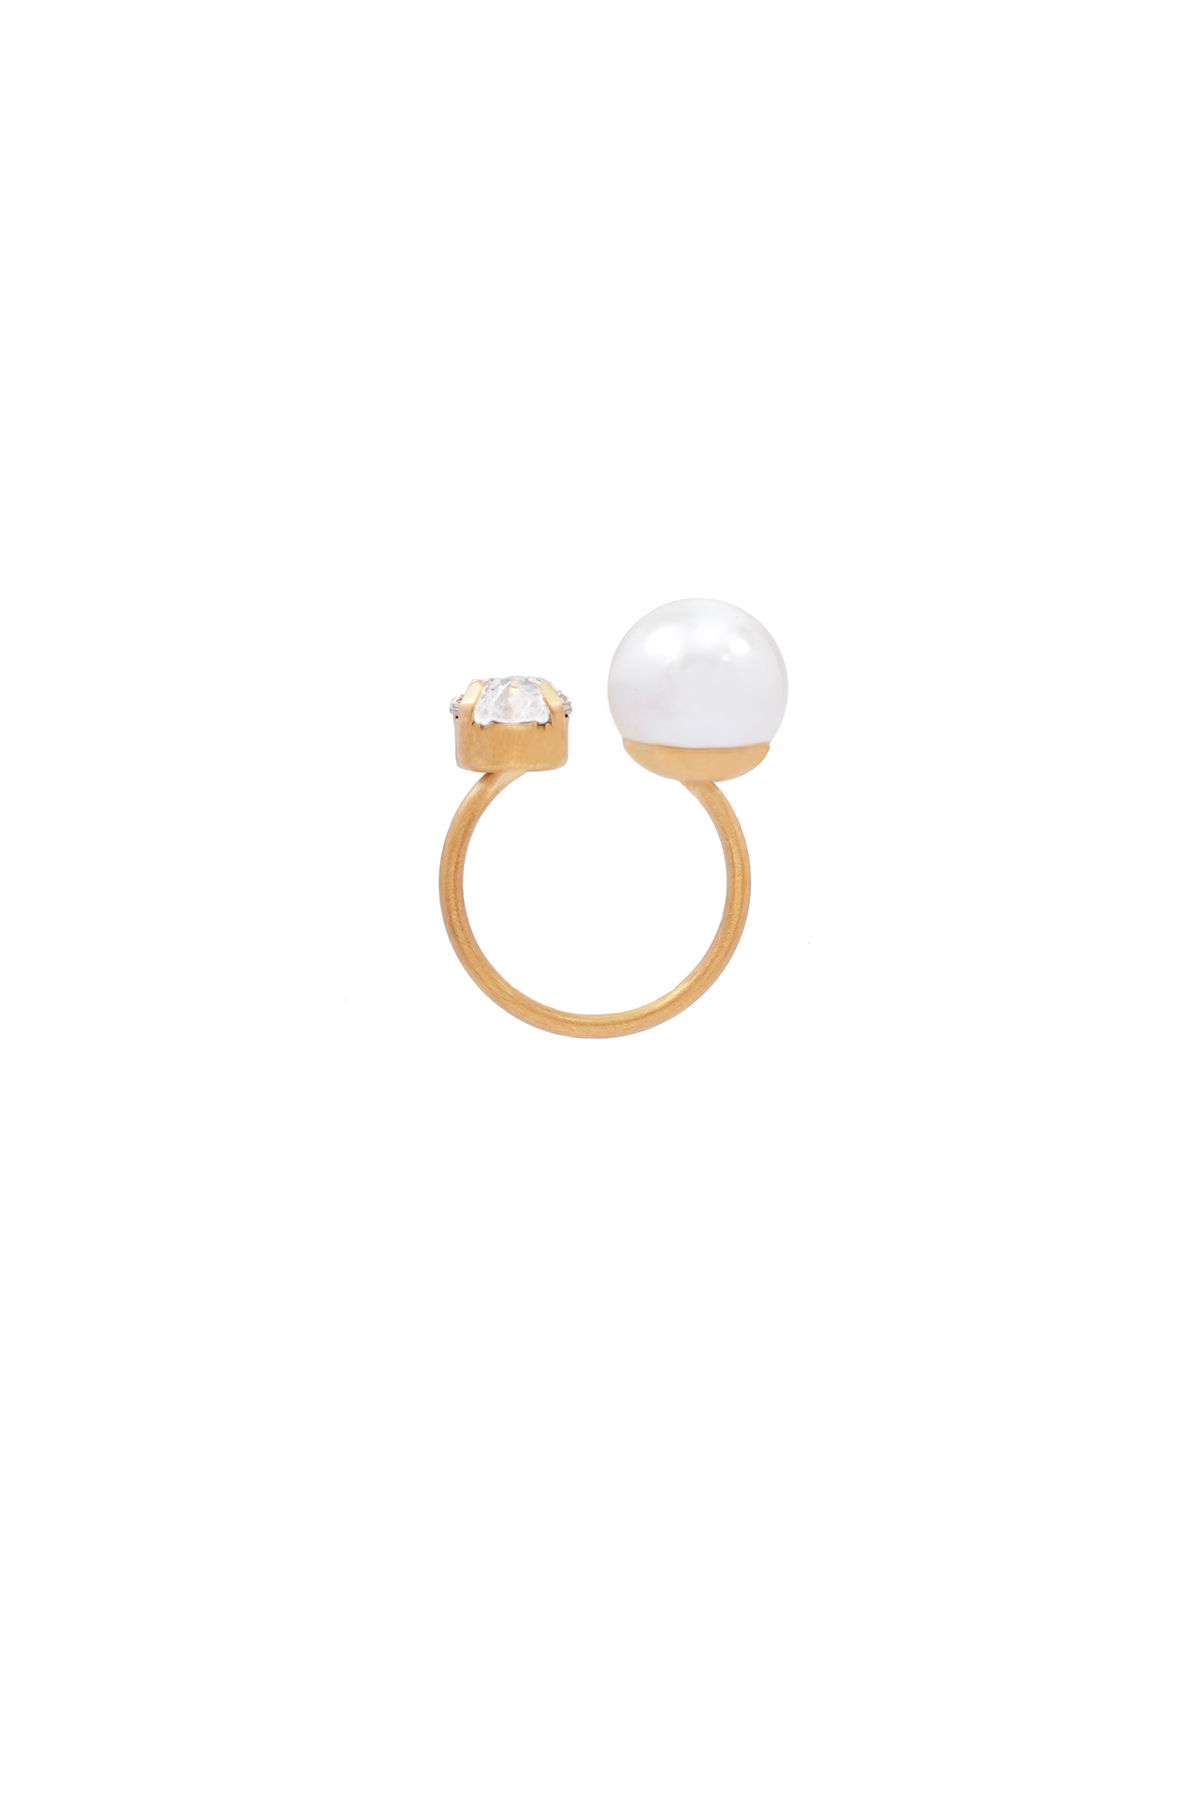 Ivy pearl ring - Adjustable